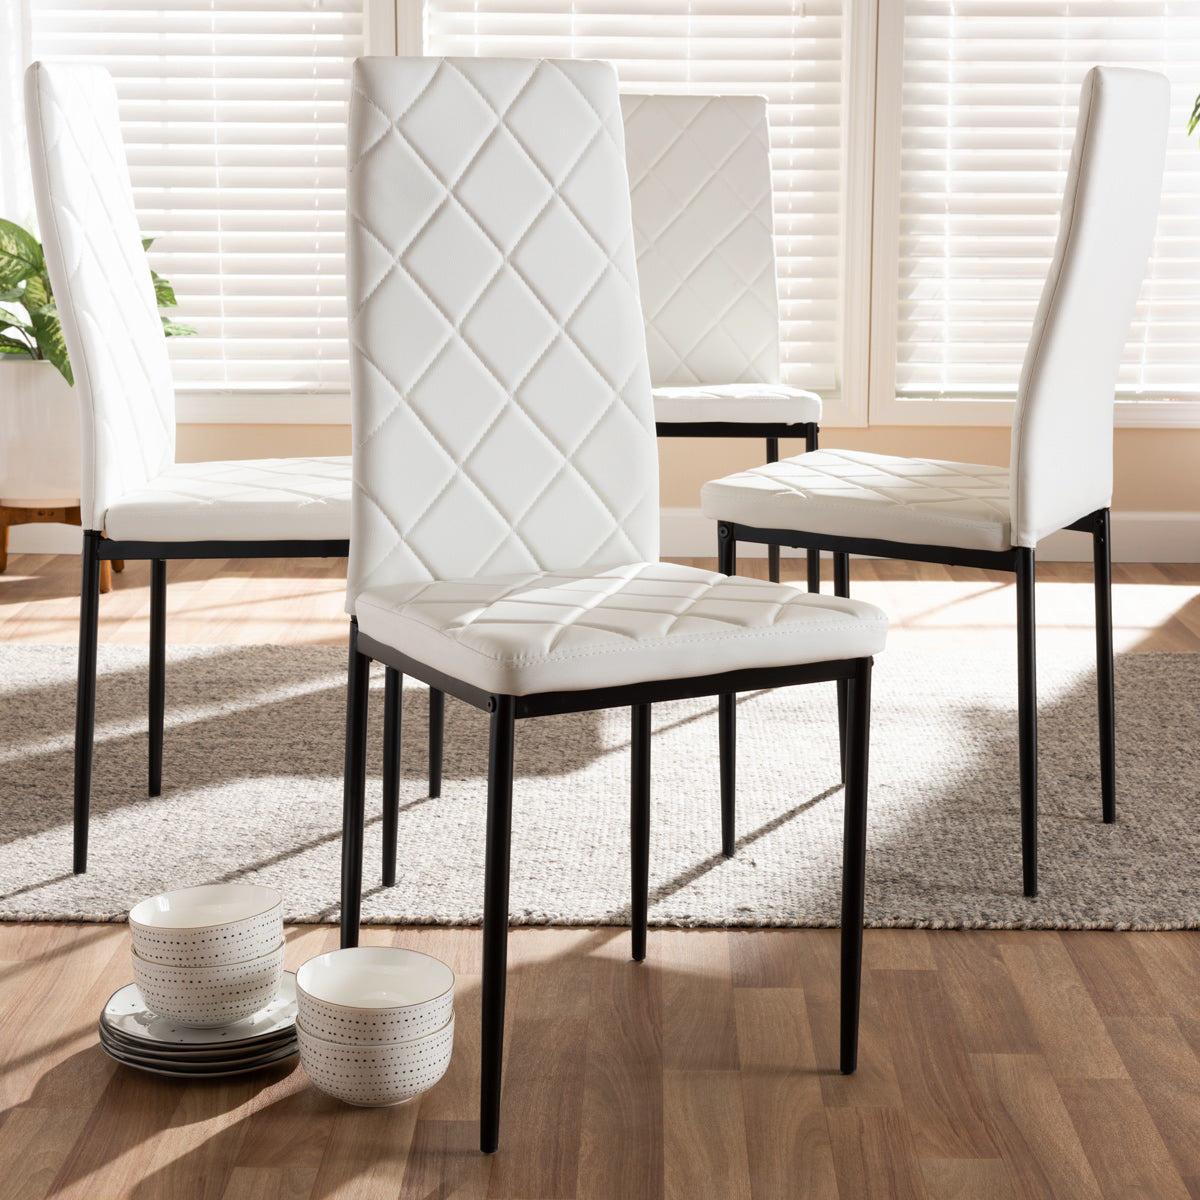 Baxton Studio Blaise Modern and Contemporary White Faux Leather Upholstered Dining Chair (Set of 4) Baxton Studio-dining chair-Minimal And Modern - 3